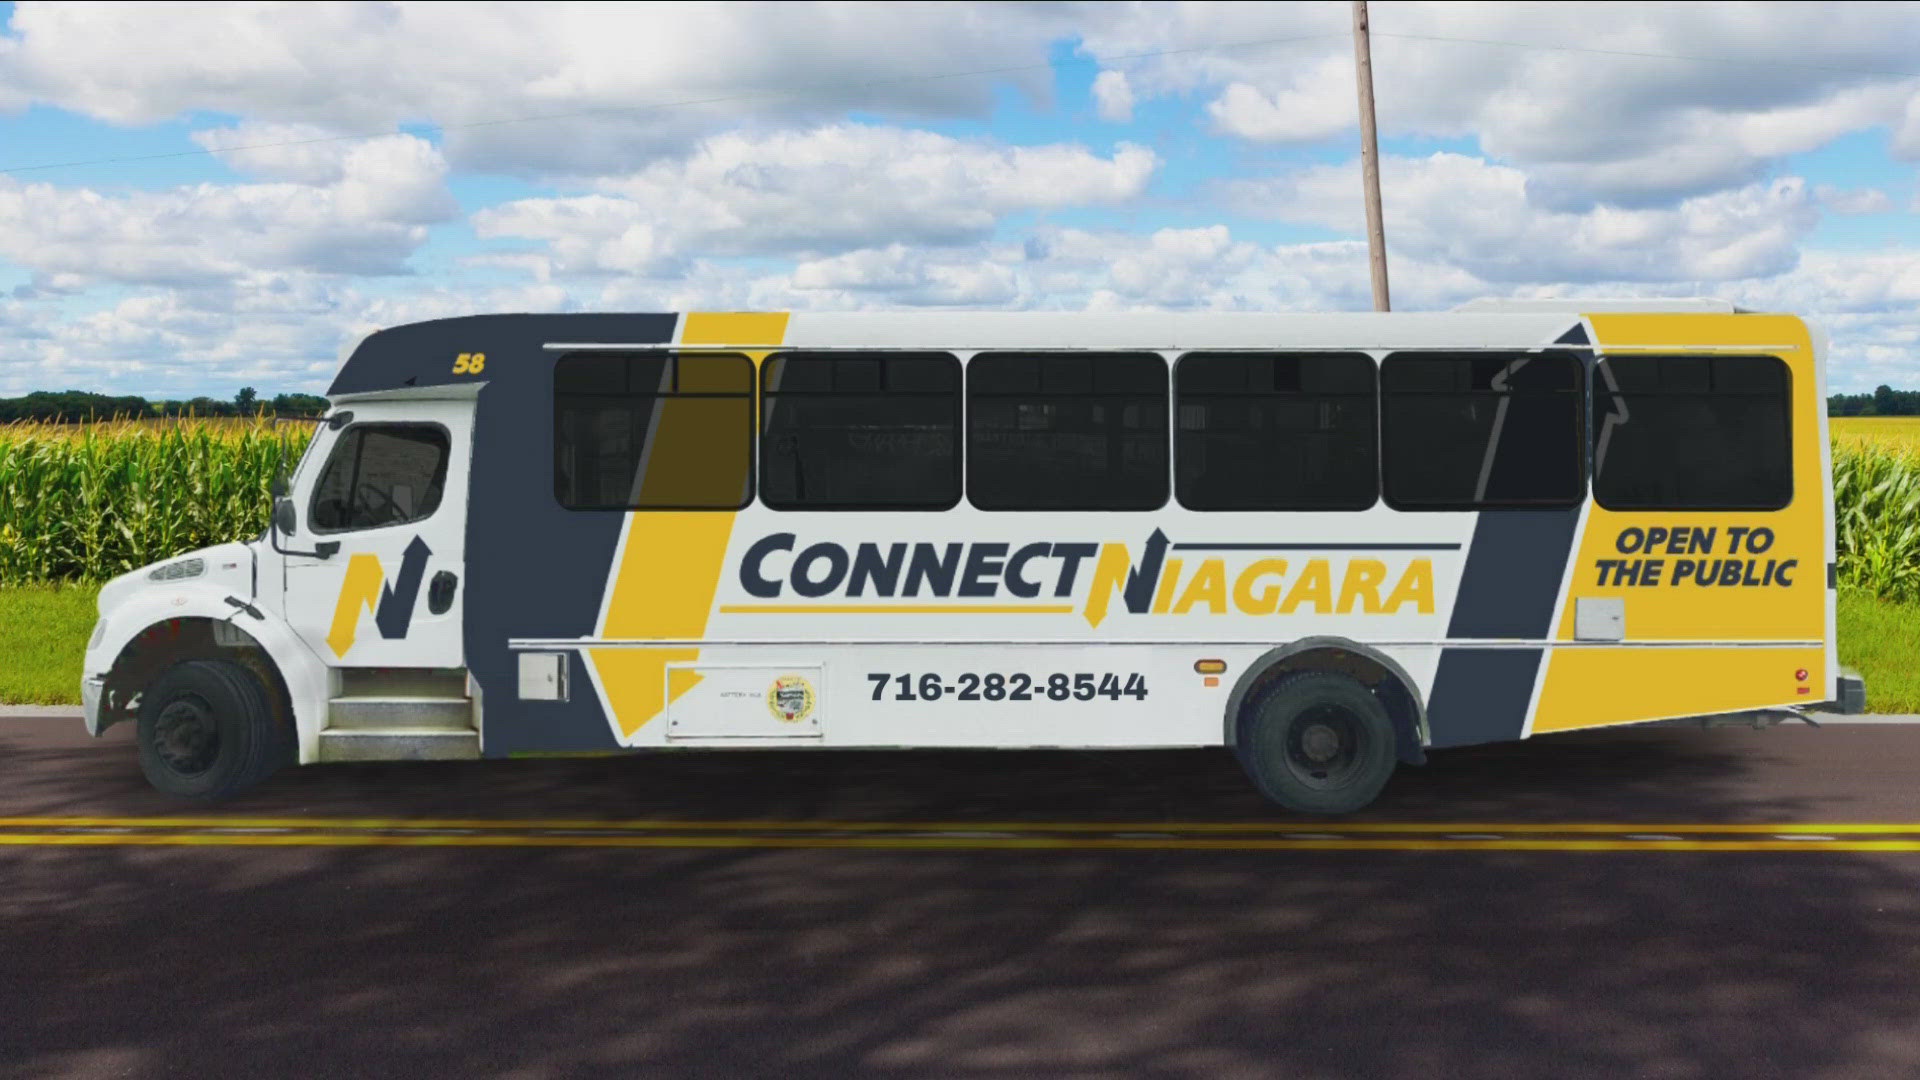 To Niagara County now, and Connect Niagara wants to give you a ride around town for free.
The bus service is waiving fees next week.